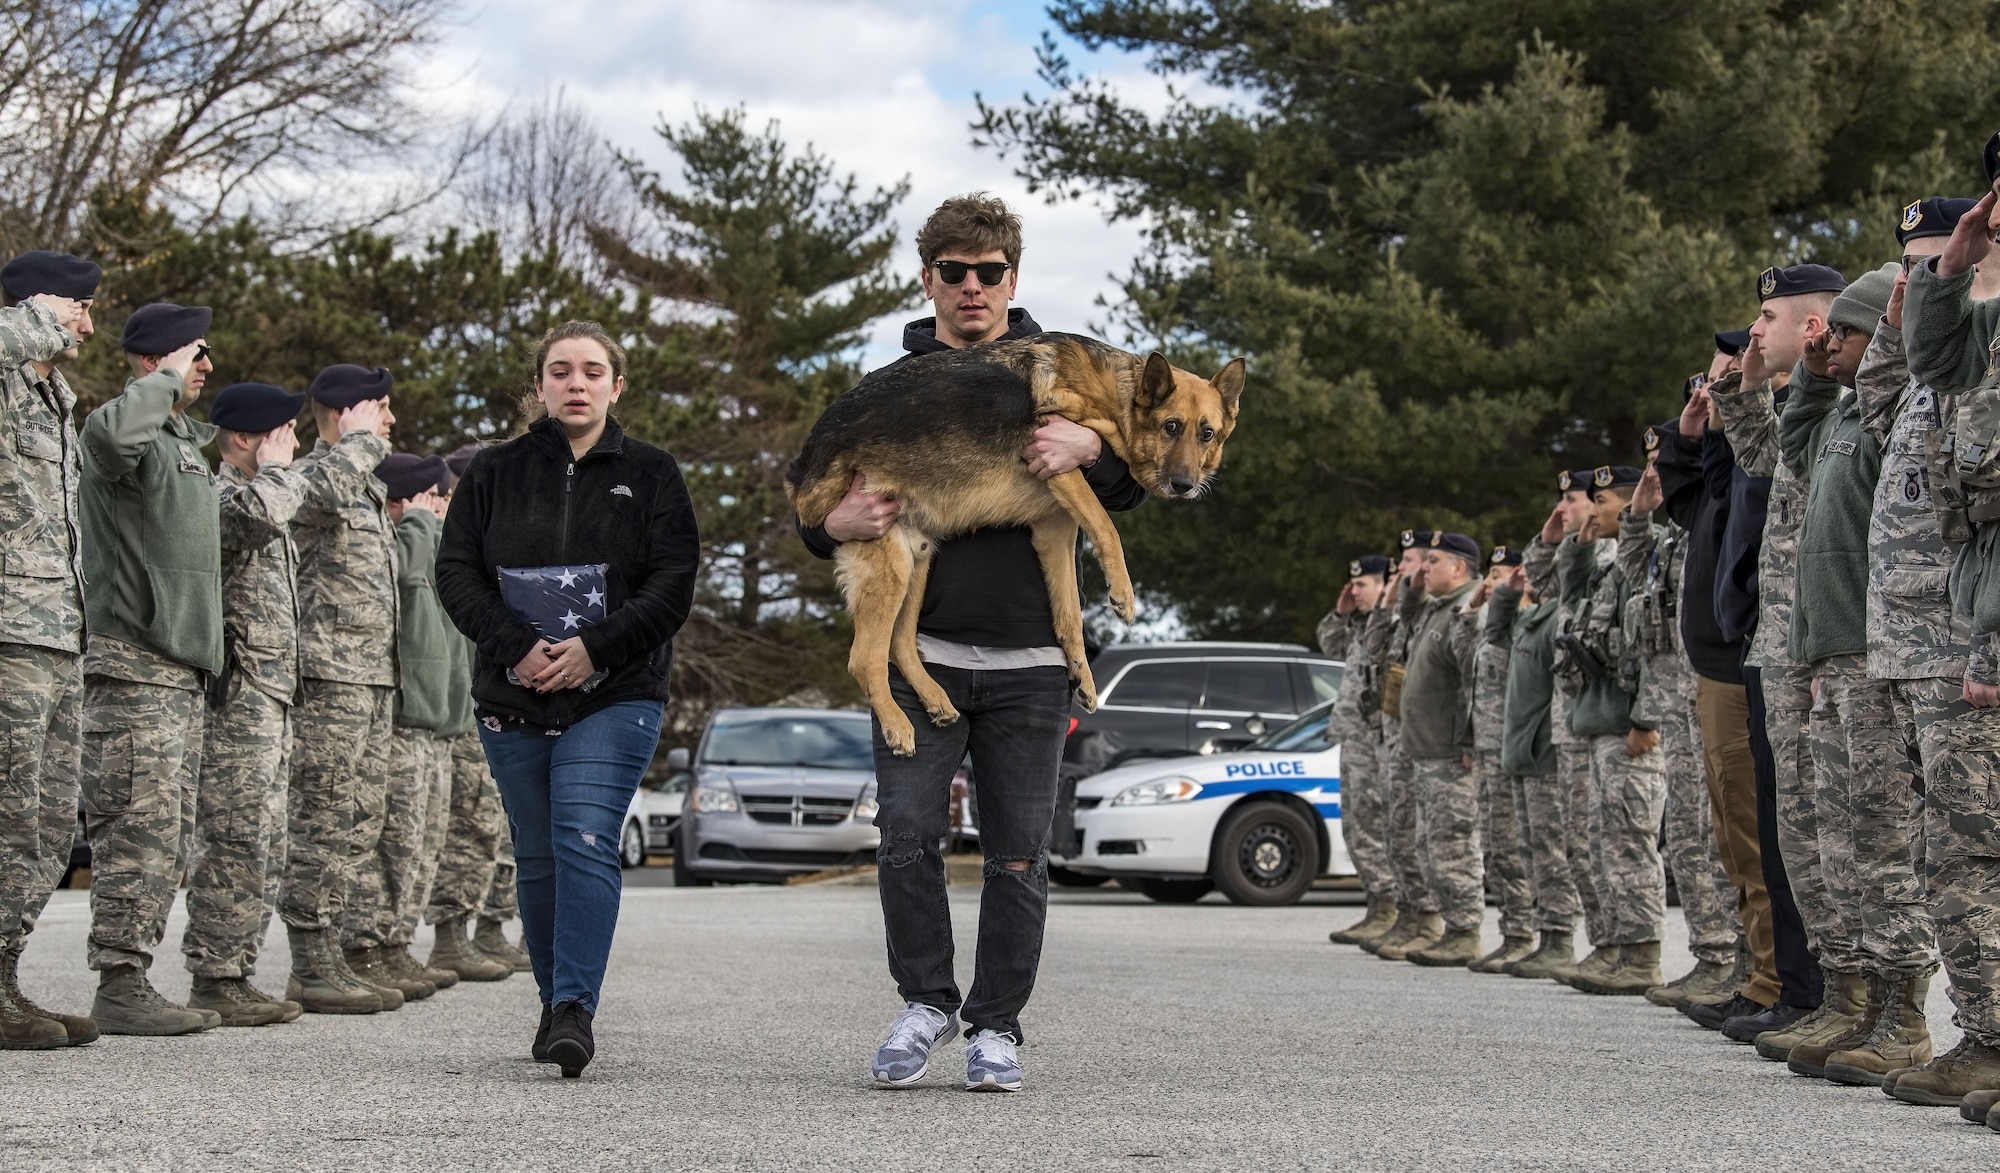 Members of the 436th Security Forces Squadron render a final salute to retired Military Working Dog Rico as his former handler and current owner, retired Tech. Sgt. Jason Spangenberg, carries him to the Veterinary Treatment Facility Jan. 24, 2018, on Dover Air Force Base, Del. Mya Spangenberg accompanied her father as they walked through the cordon. (U.S. Air Force photo by Roland Balik)